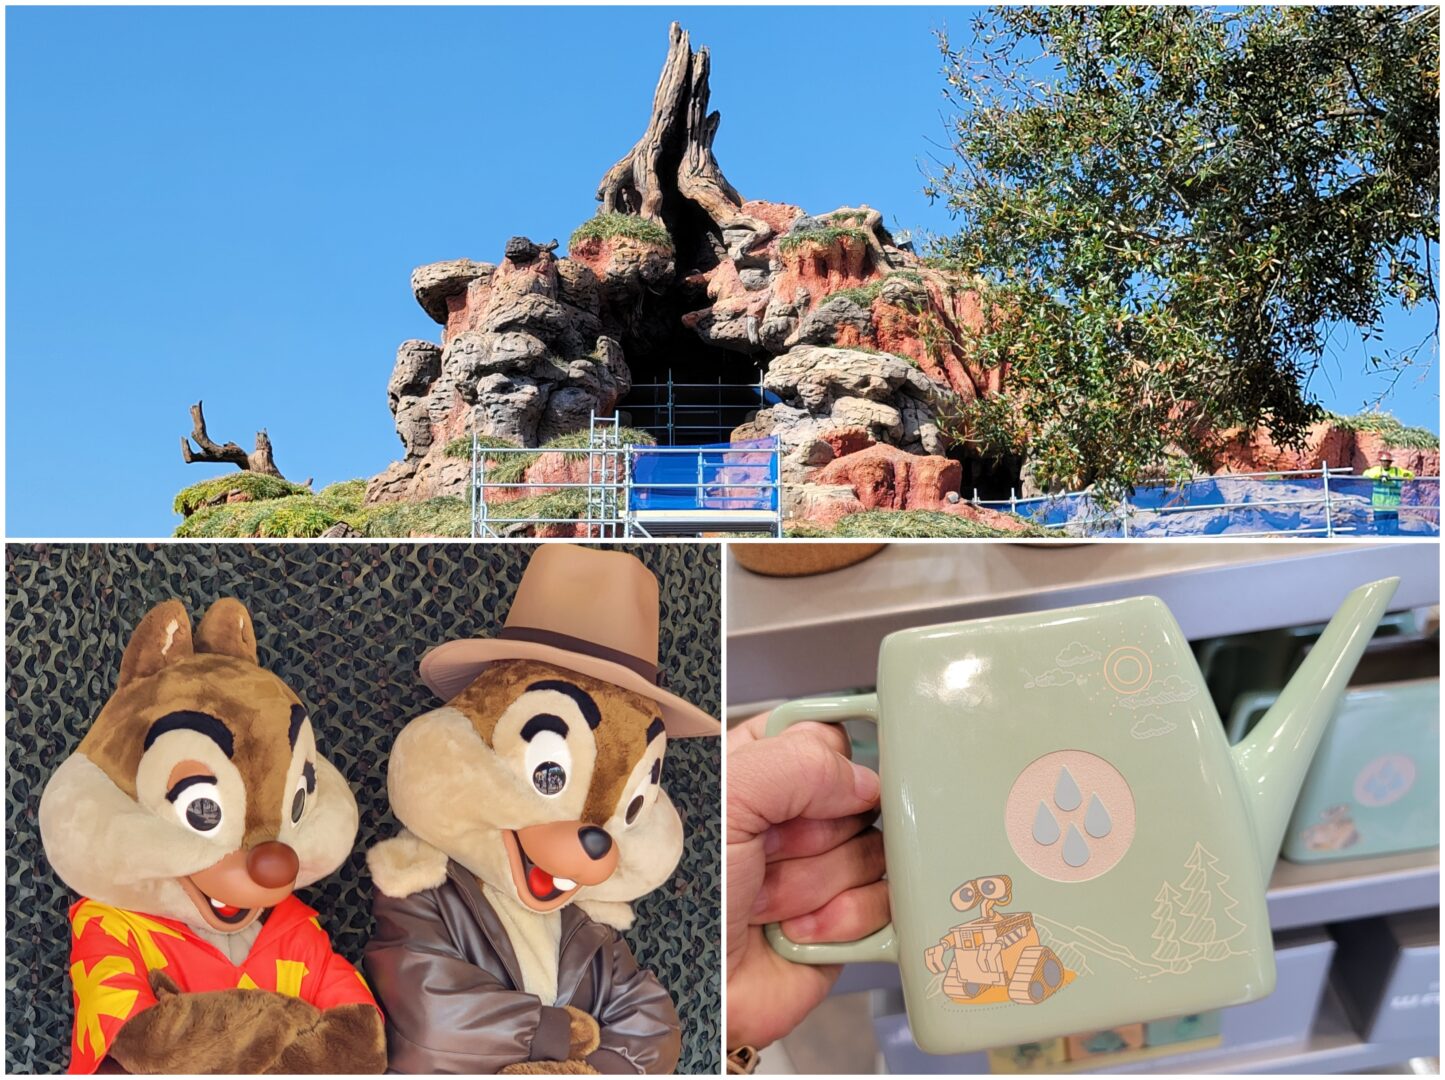 Disney News Highlights: Tiana’s Bayou Construction Update, Chip ‘n Dale Rescue Rangers at Hollywood Studios, What’s New on Disney + in March